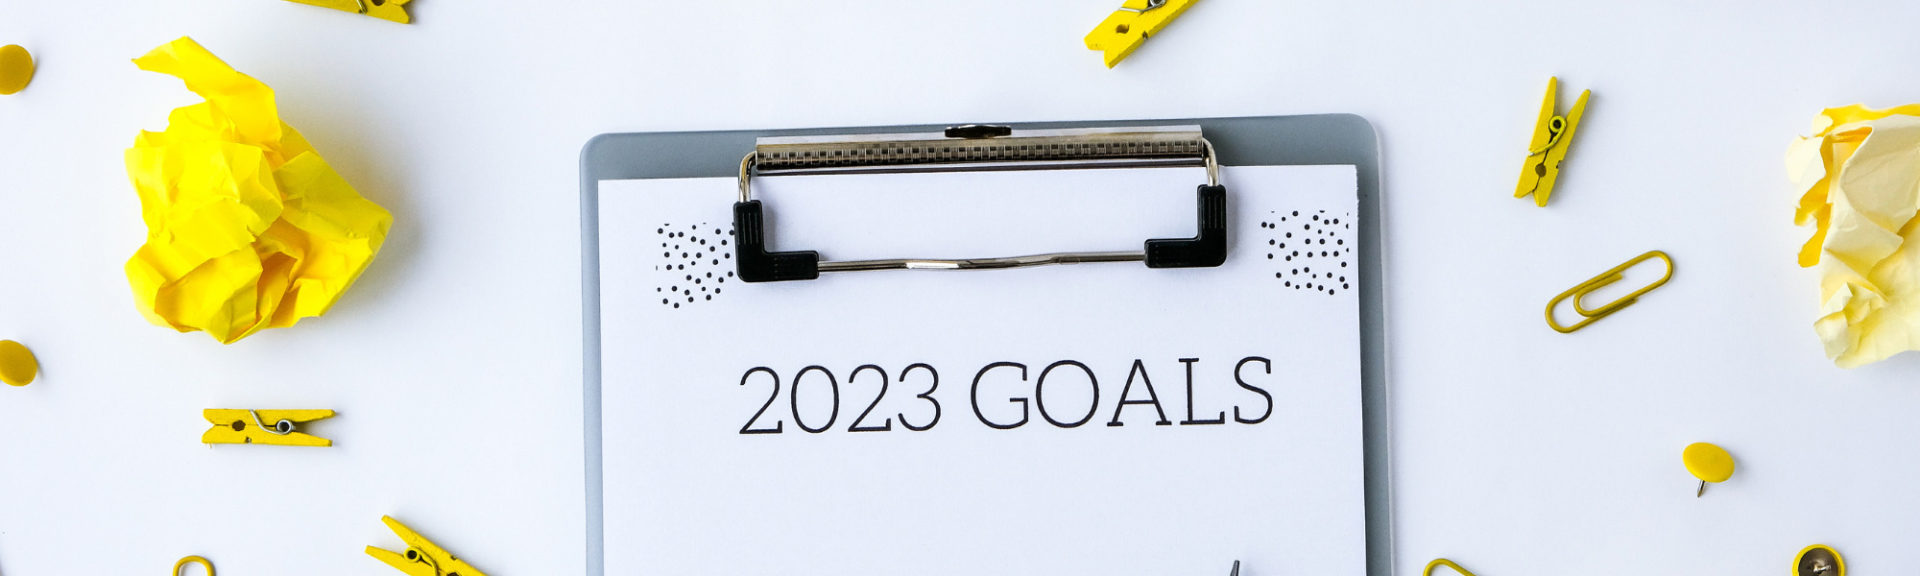 How social media trends are changing how we create our 2023 resolutions